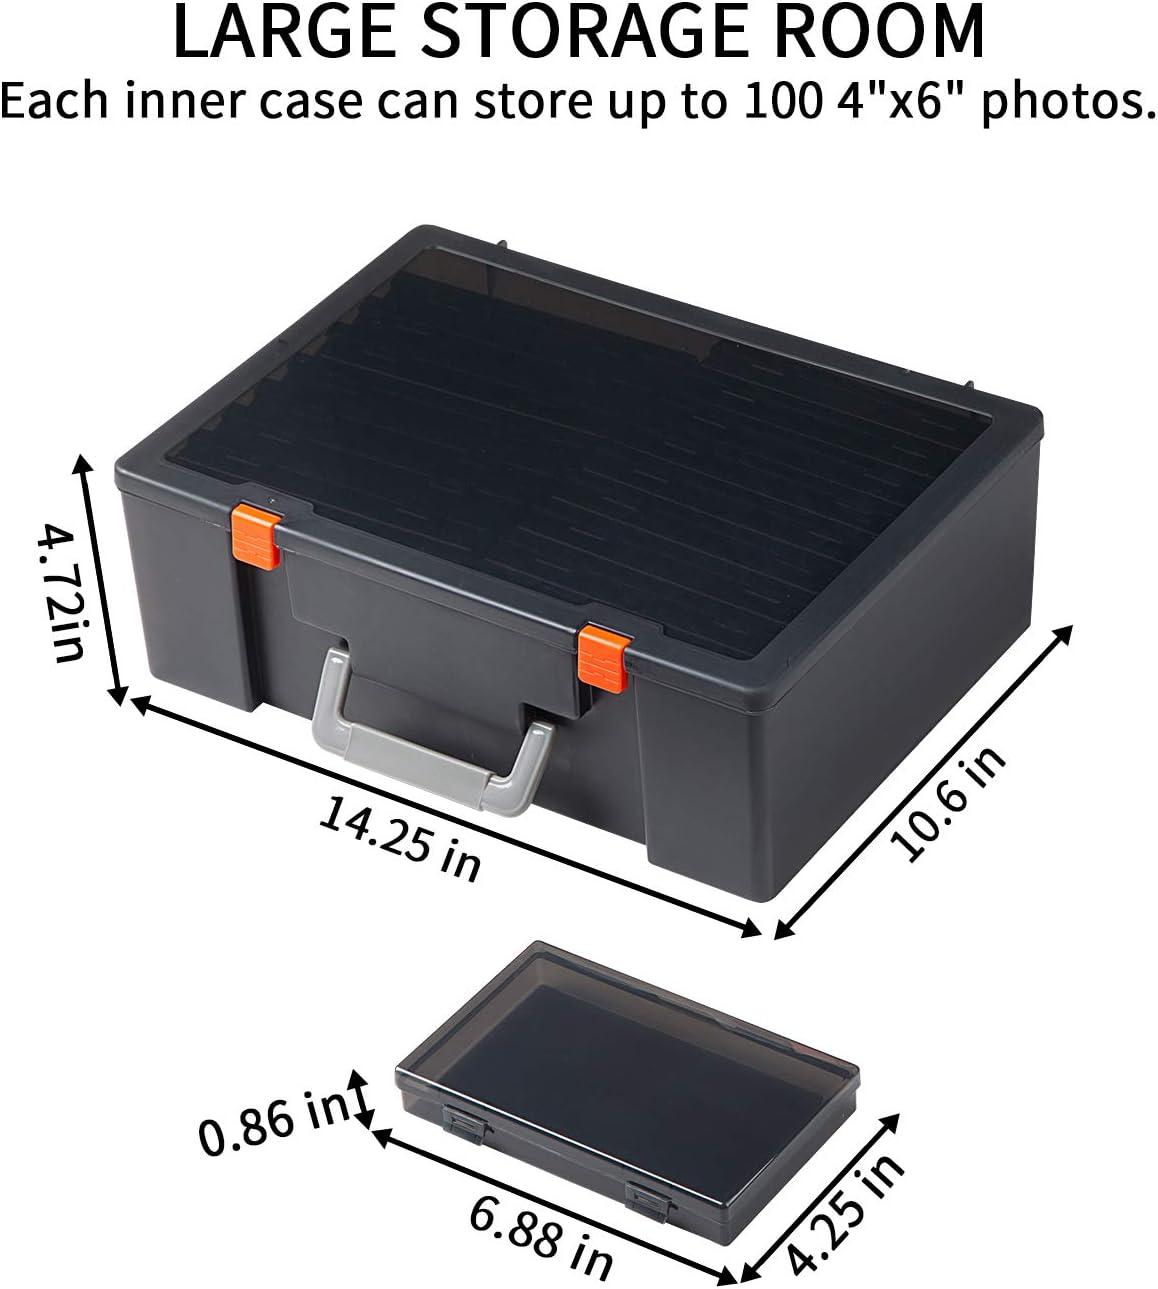 Barhon Photo Storage Box 4x6 Pictures 18 Inner Seed Storage Organizer Extra  Large Photo Organizers Keeper Photo Cases Picture Storage (Black)